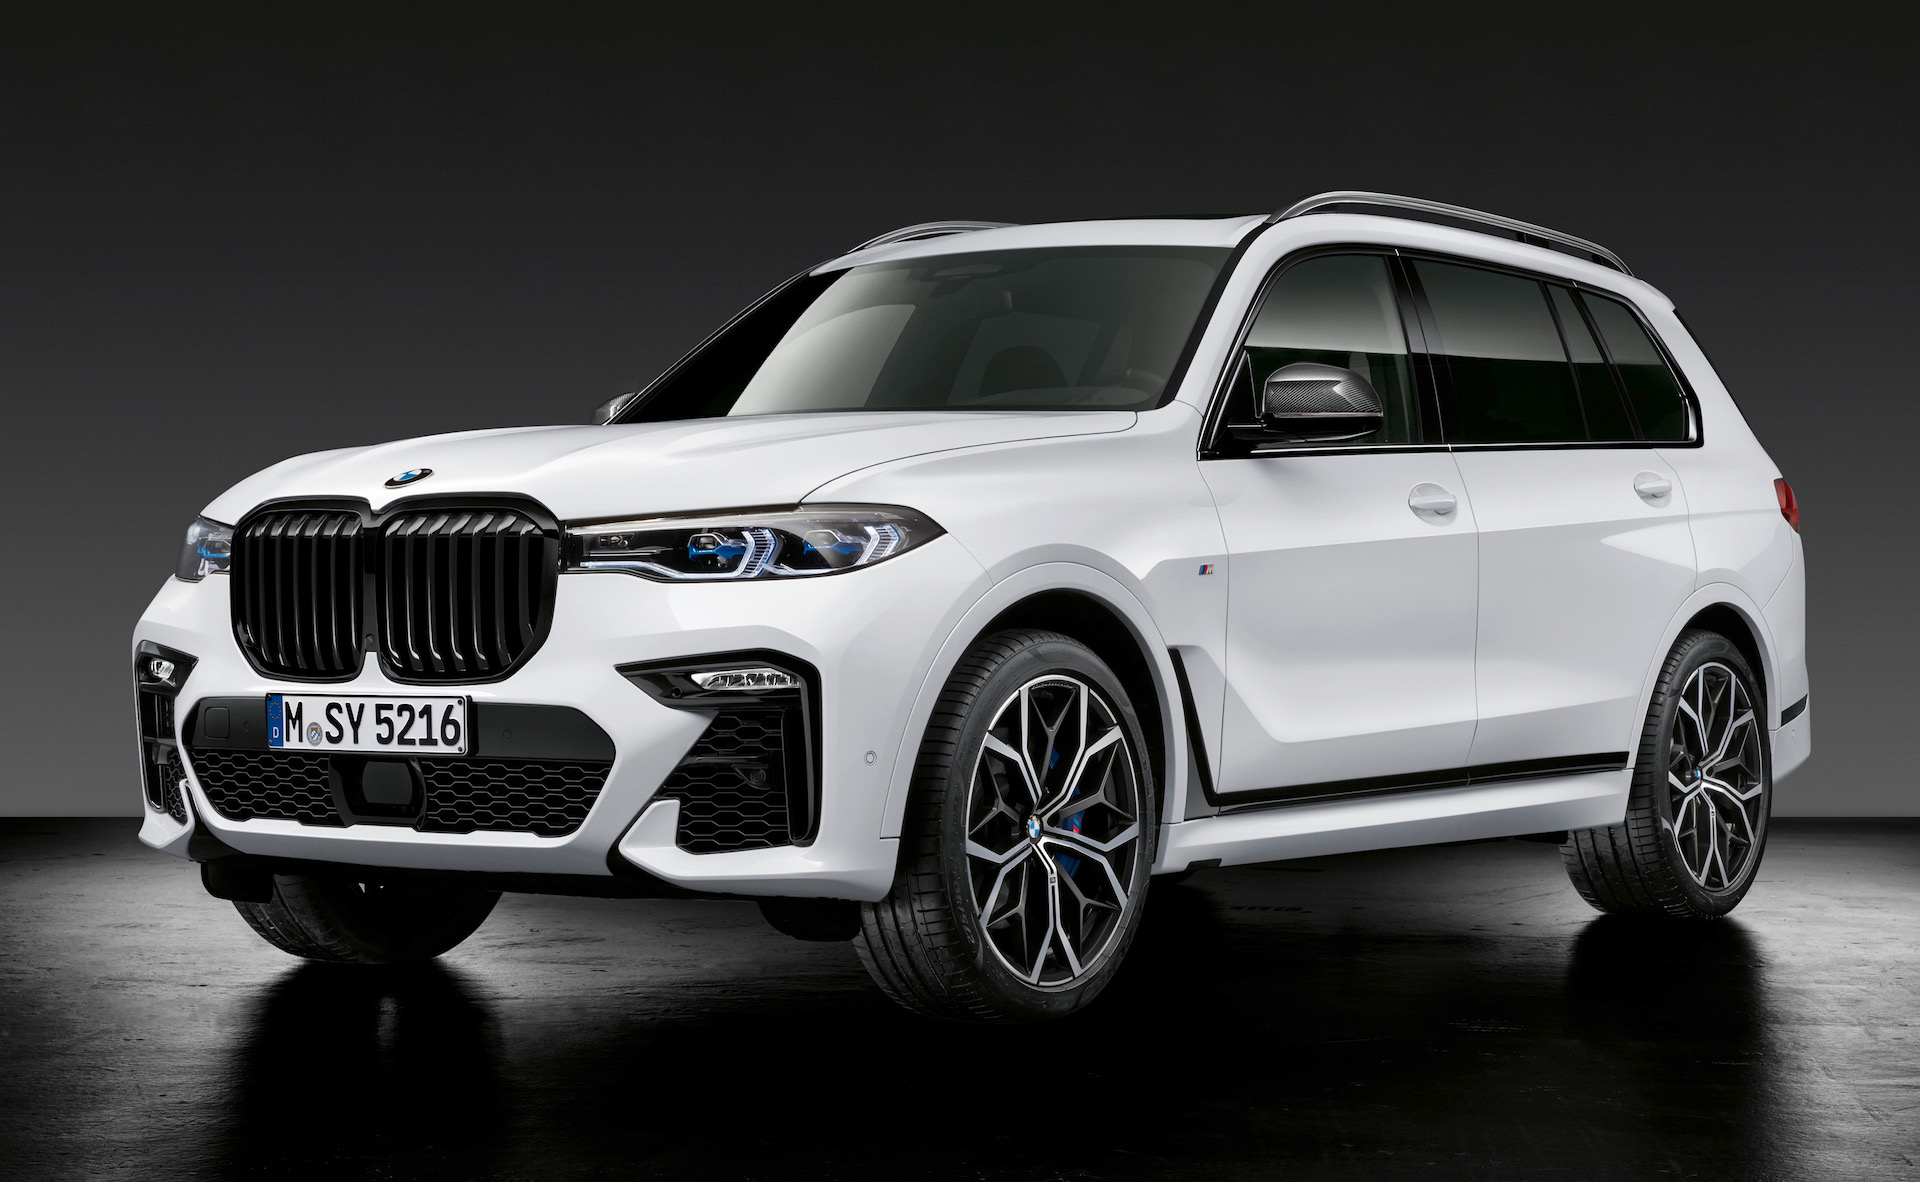 BMW M Performance parts announced for X5 M, X6 M, X7